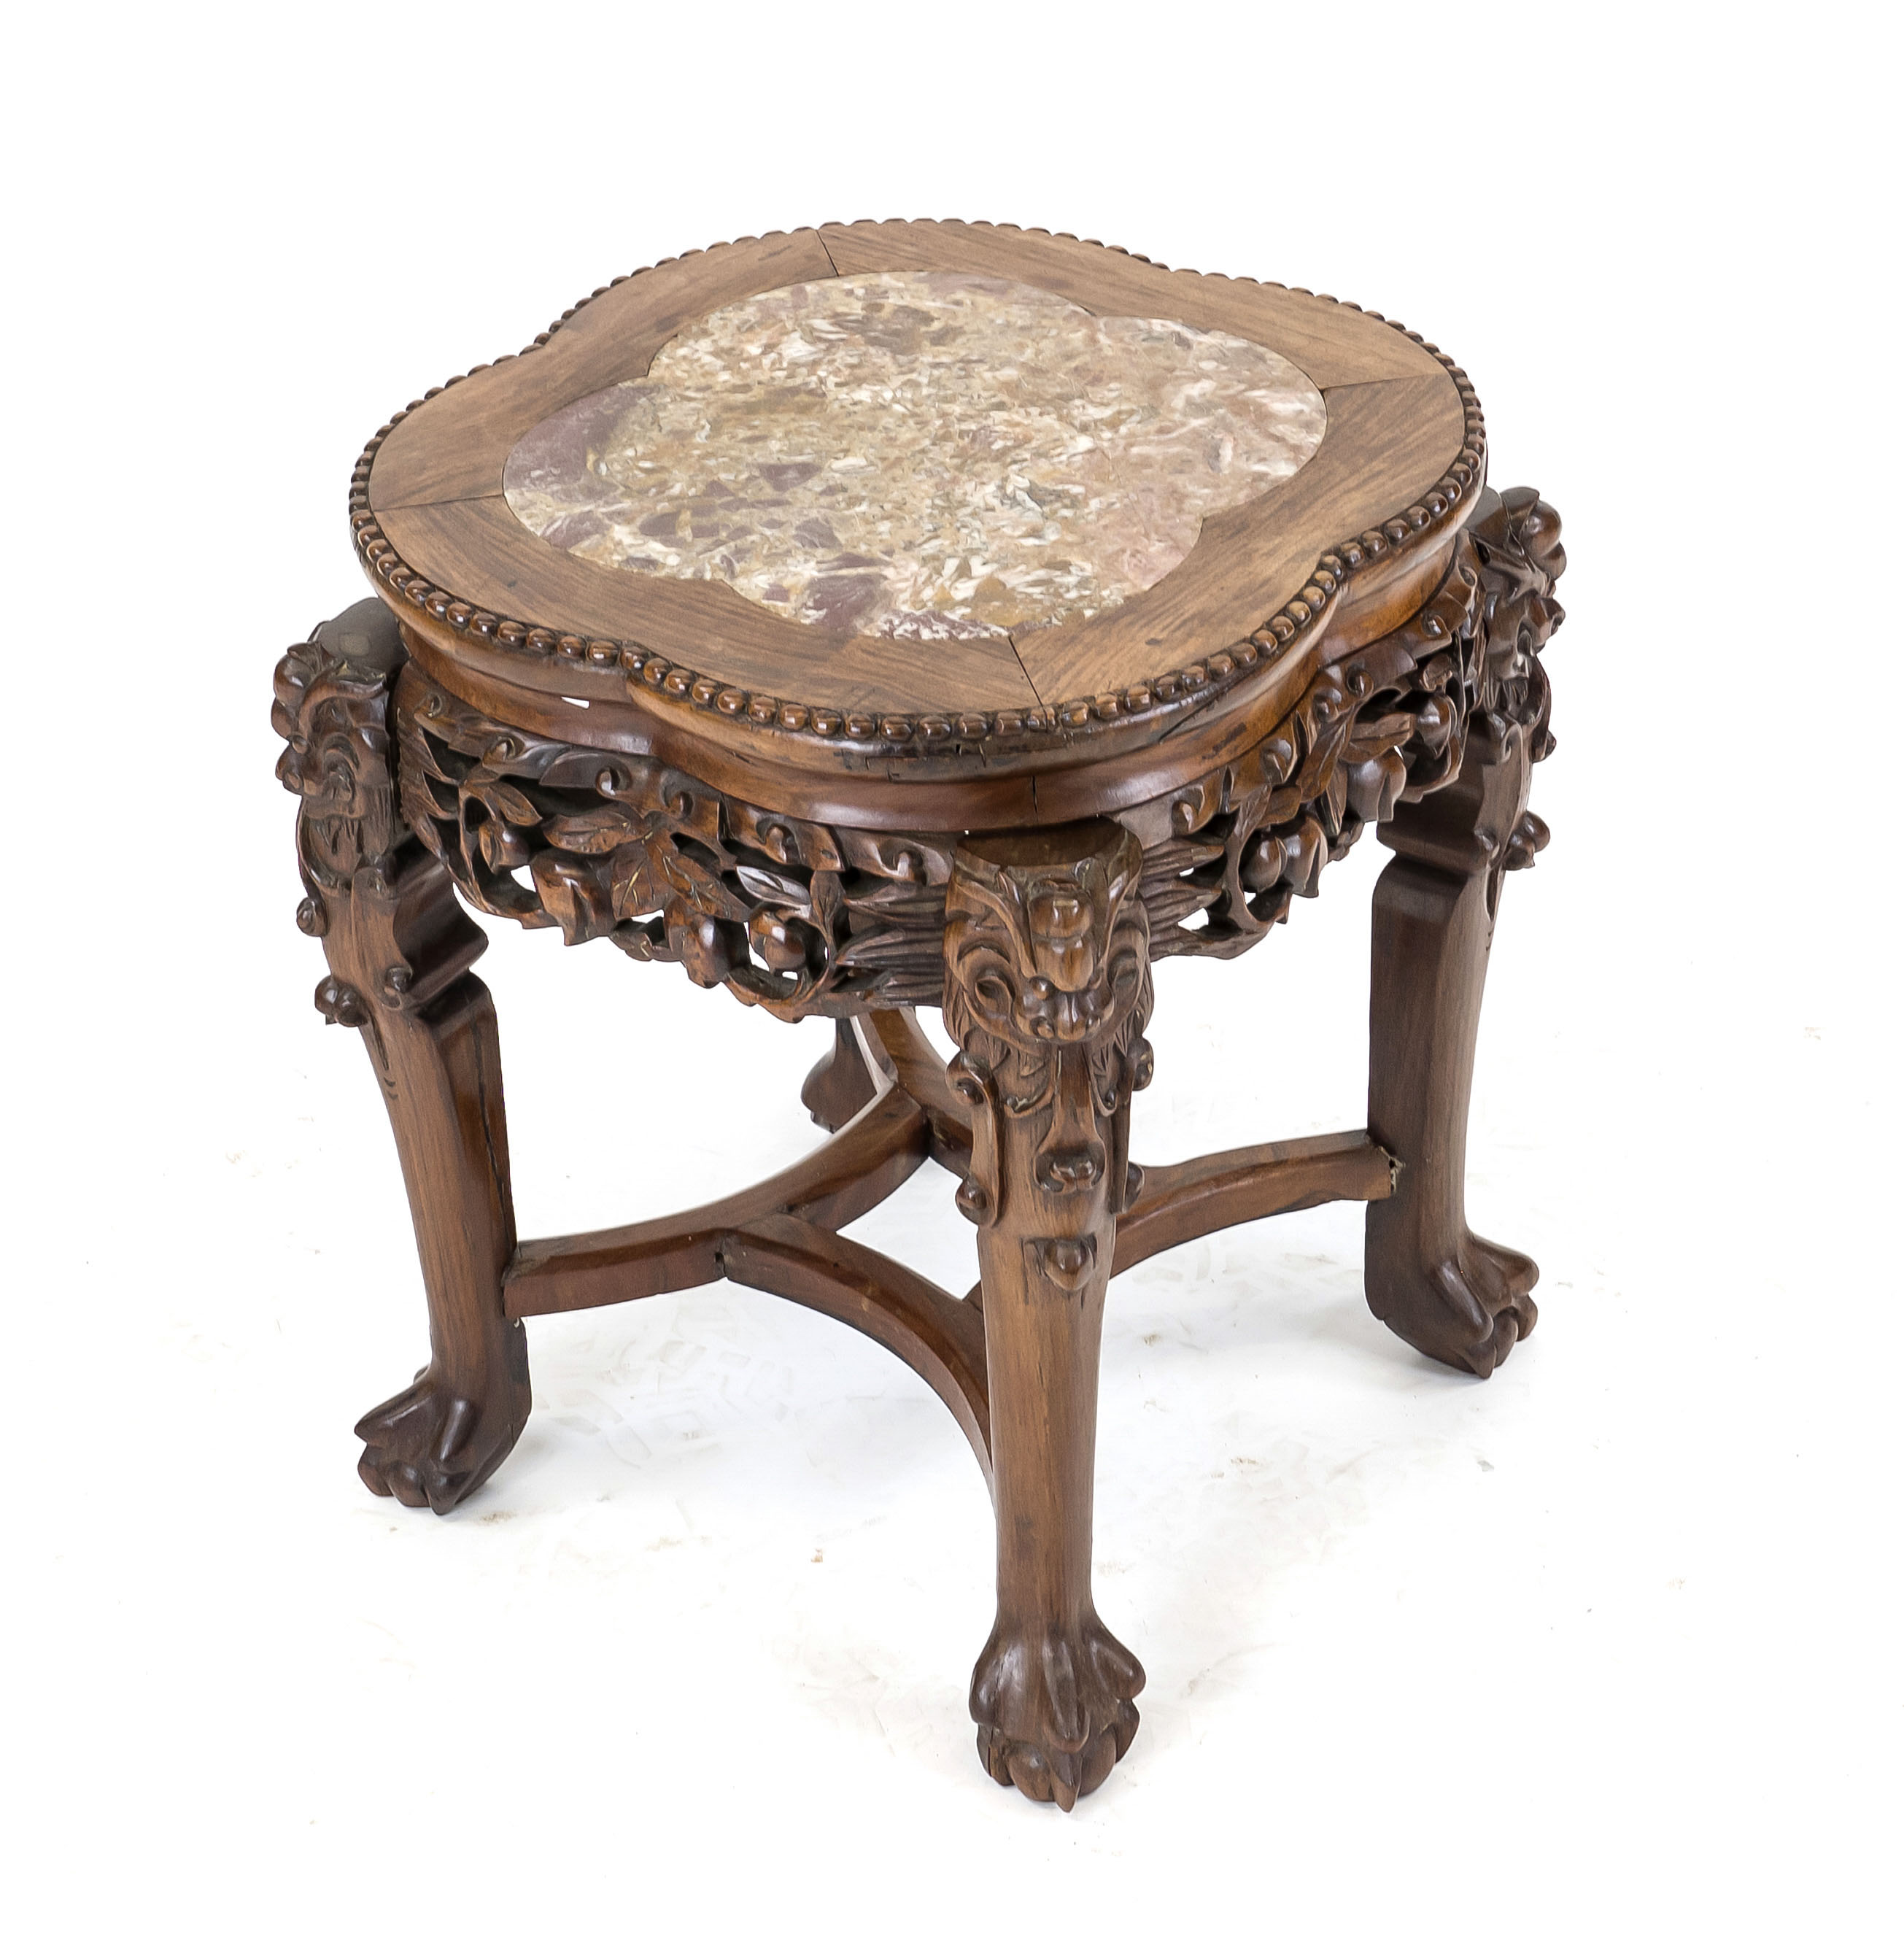 Small table, Asia, 1st half 20th century, dark, finely grained hardwood with stone inlay. Open-